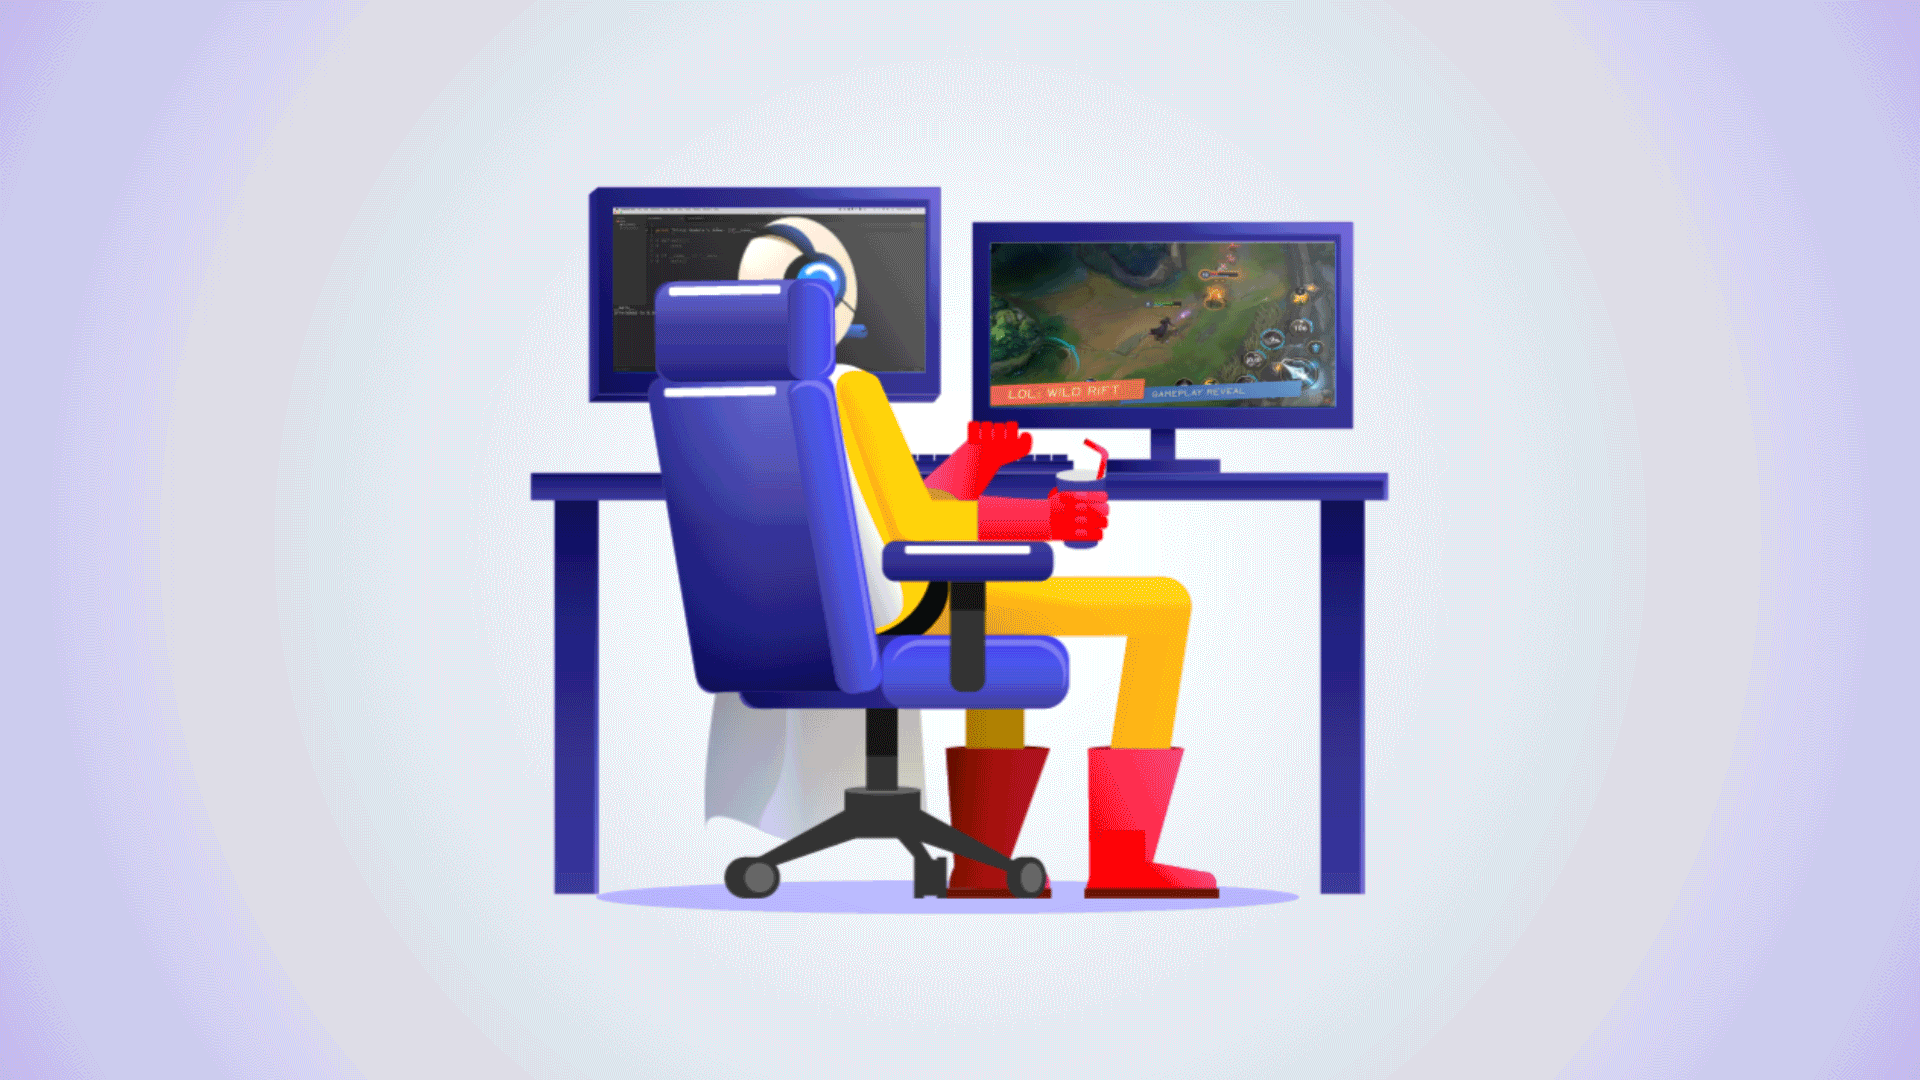 Gaming During Work: A Distraction Or A Means For Productivity